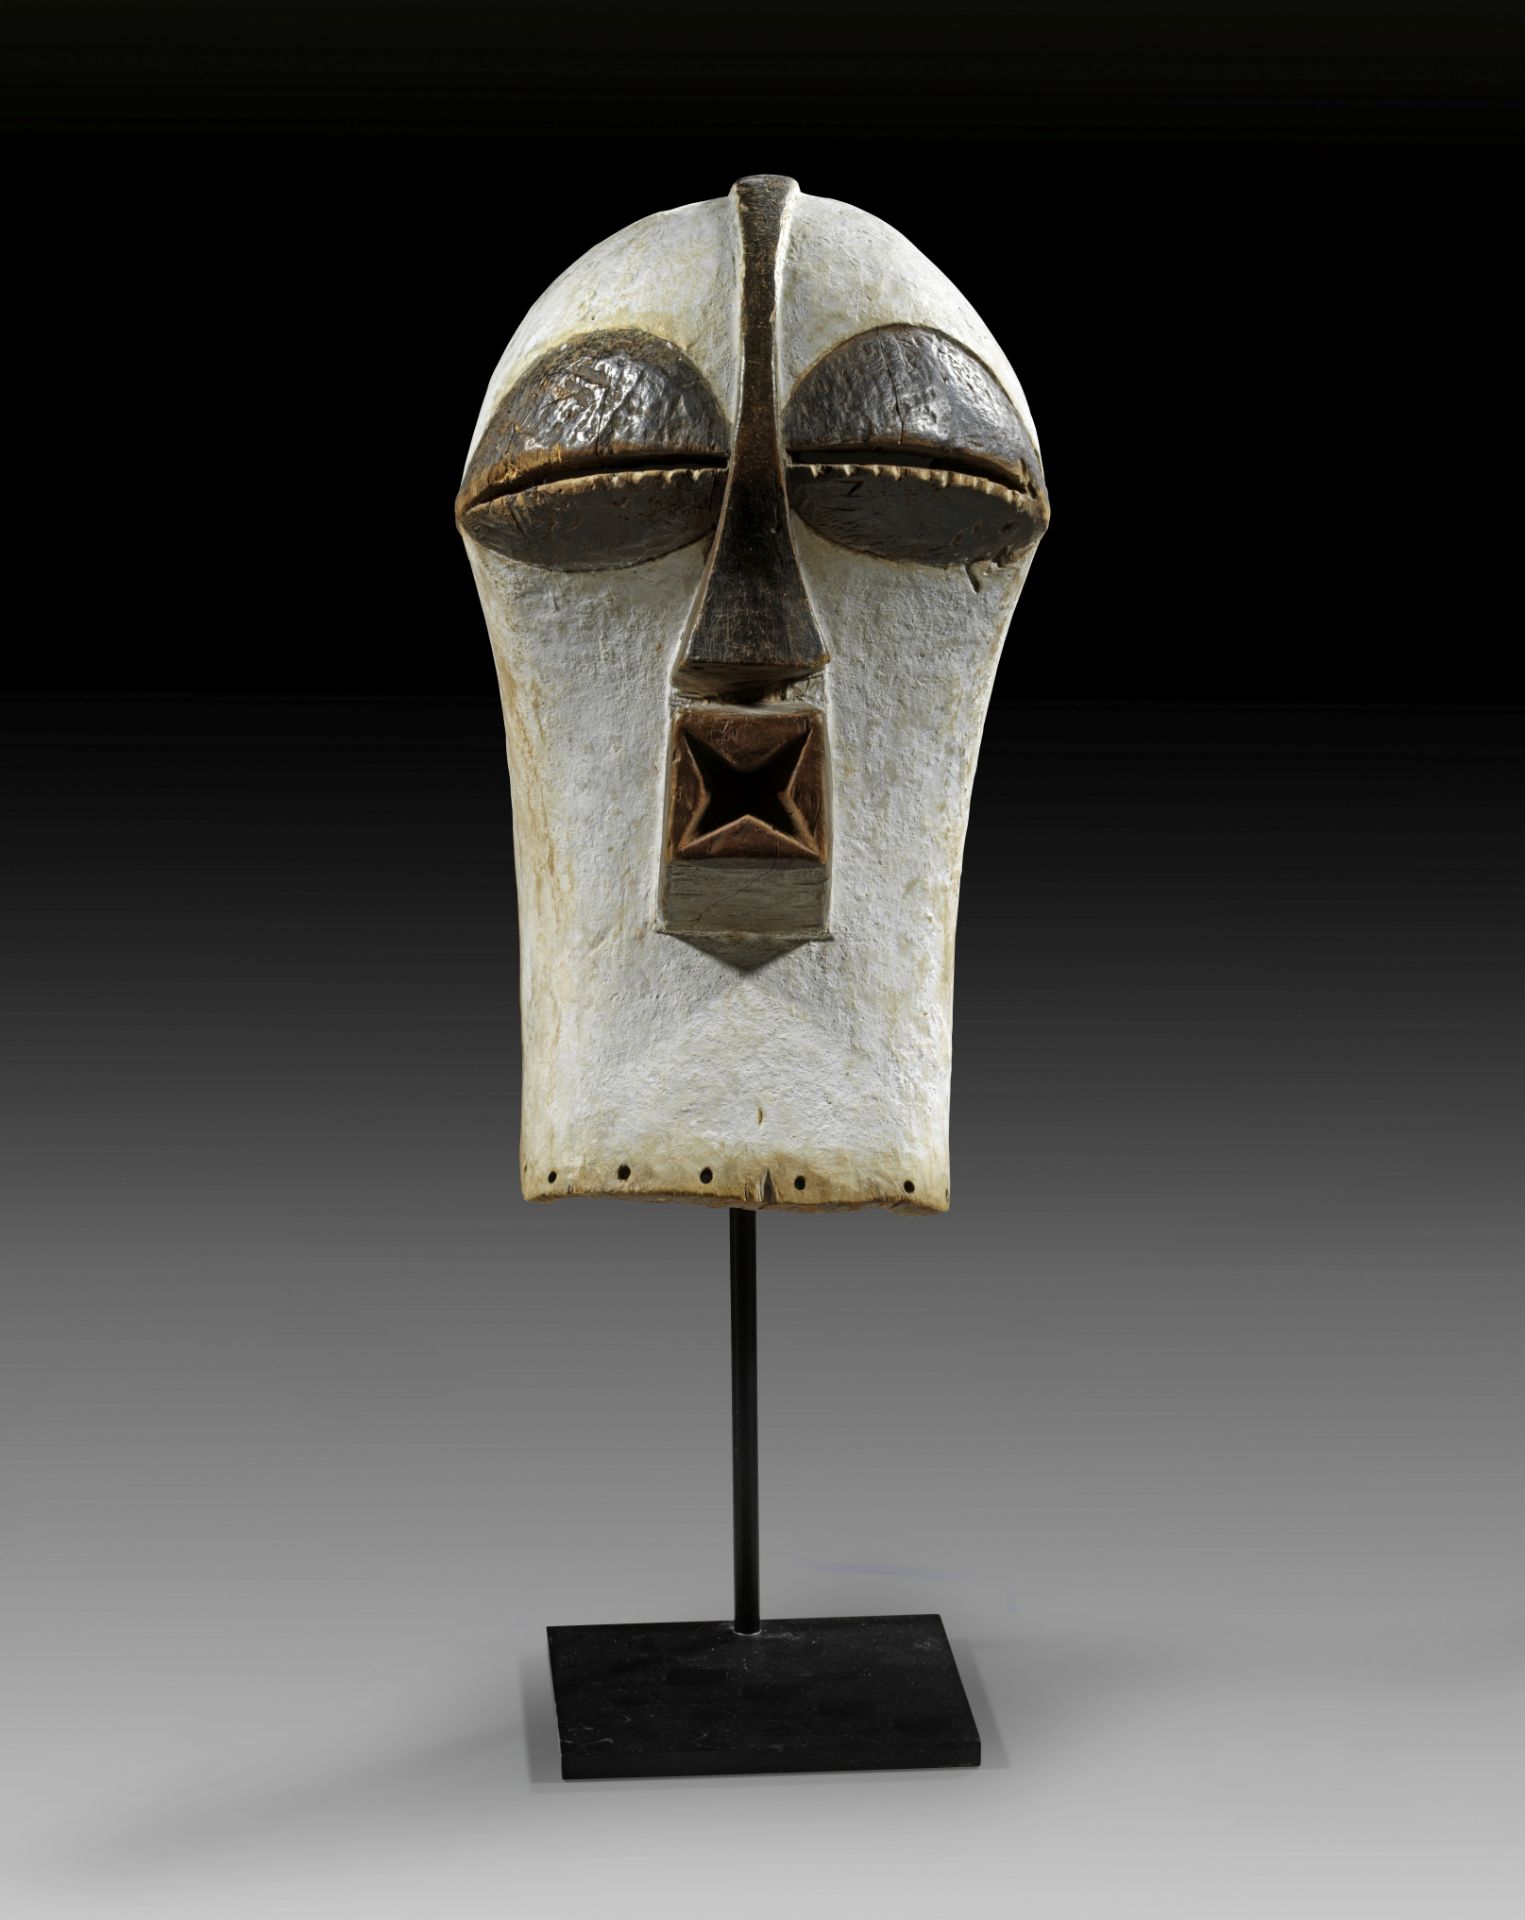 Songe kifwebe mask with classic expression.